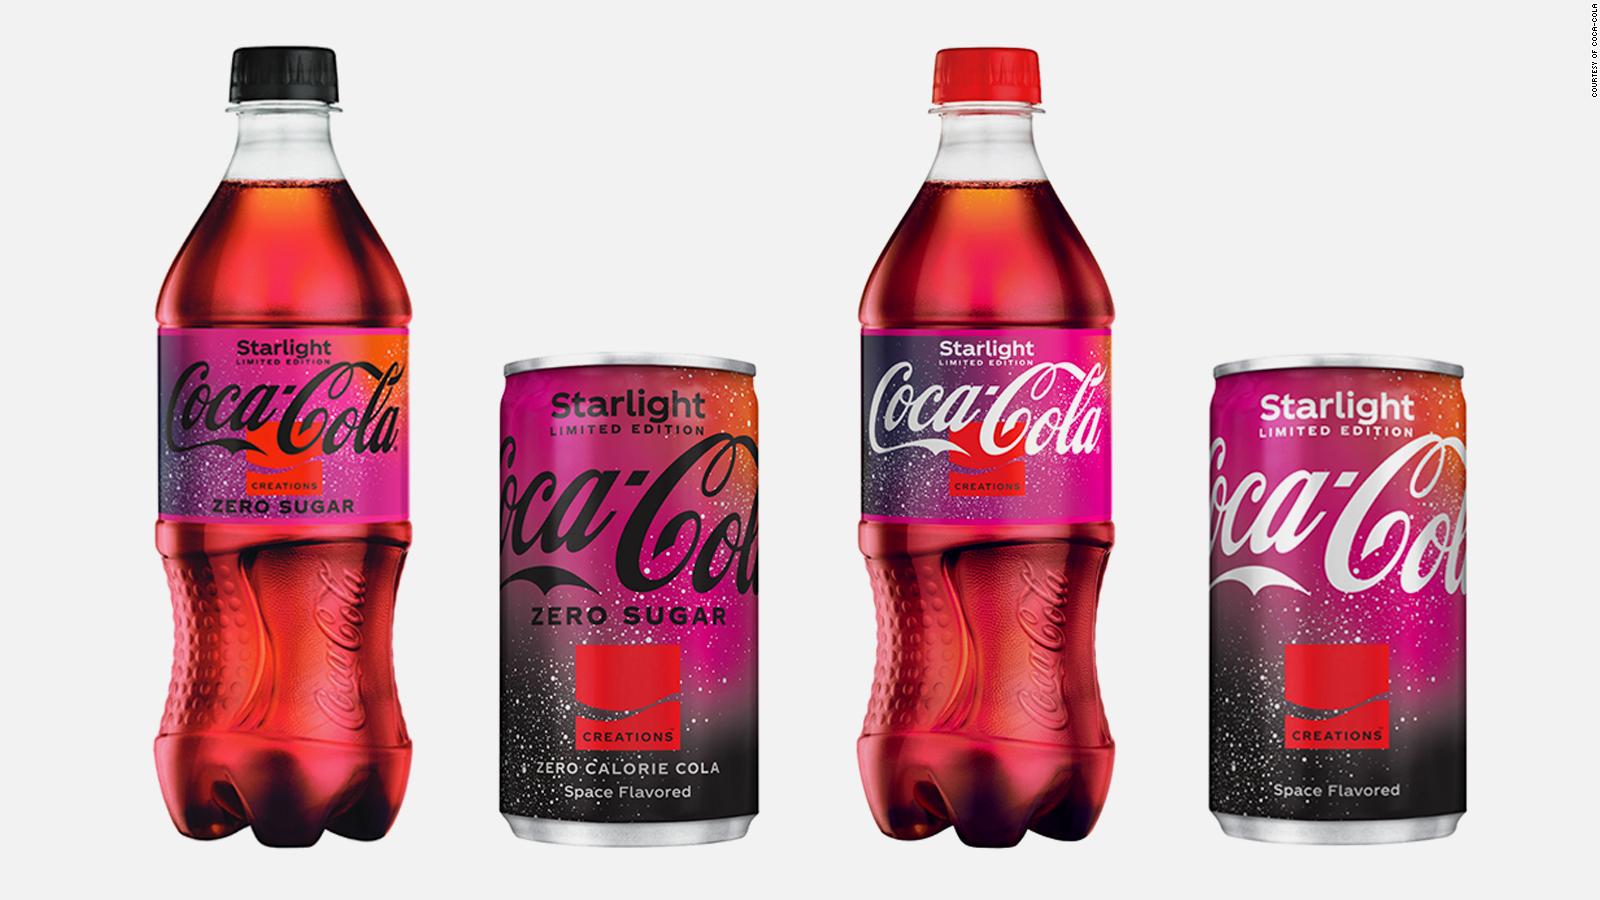 CocaCola Starlight Coke's new flavor is out of this world CNN